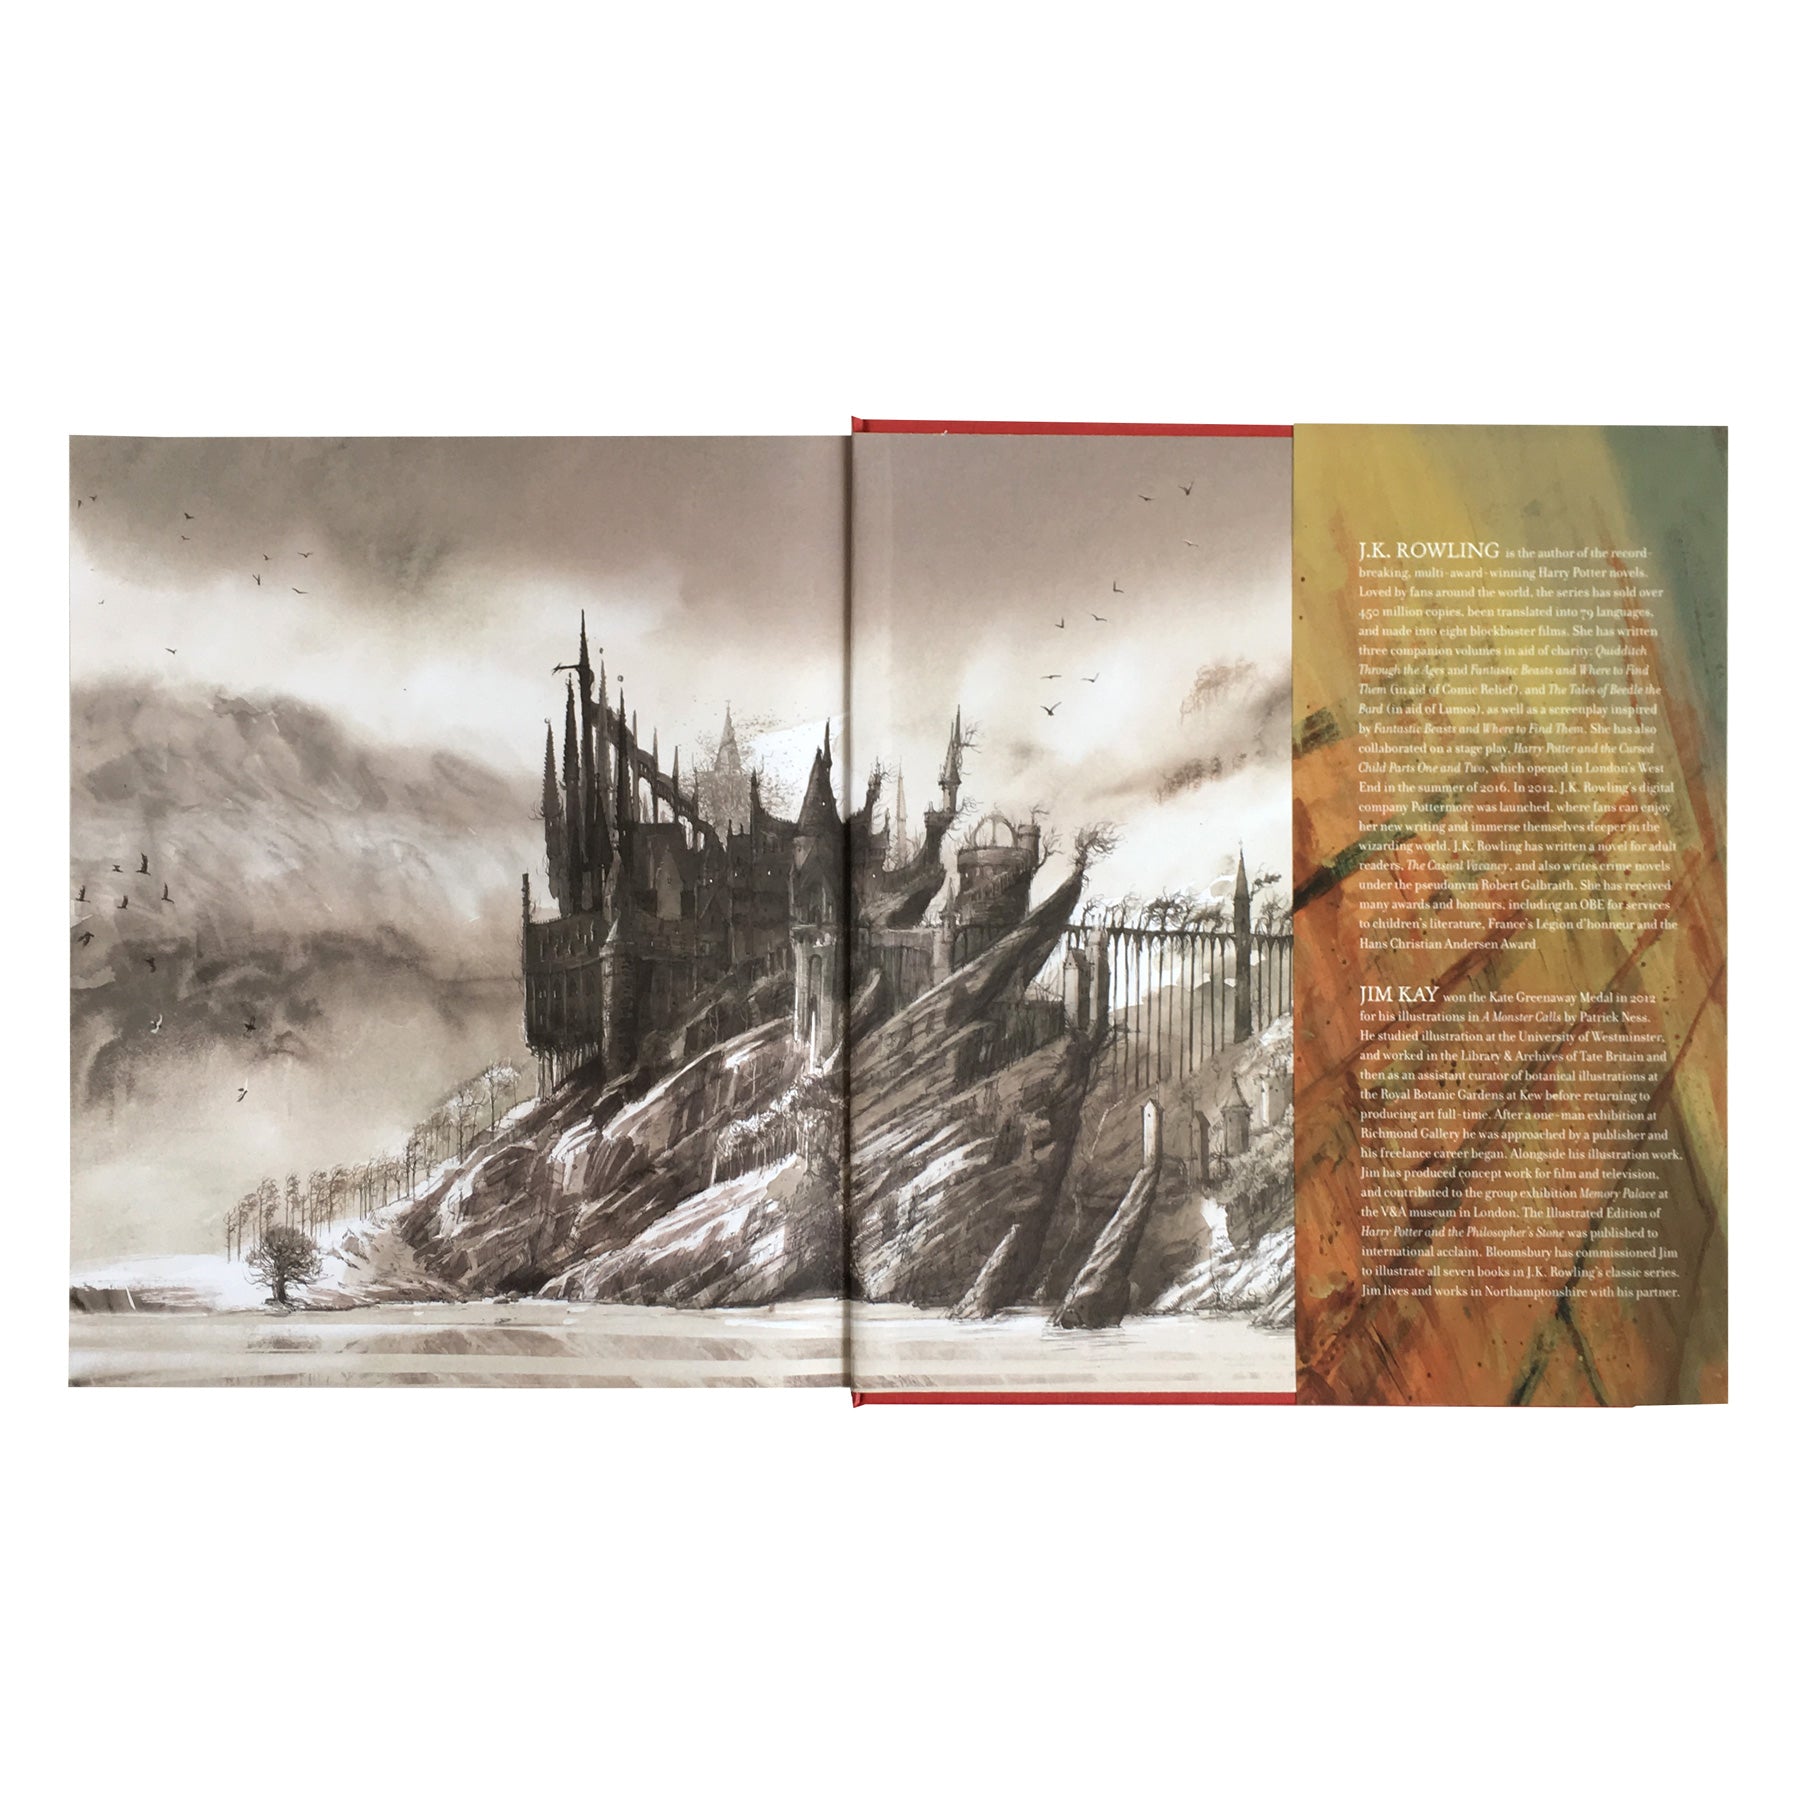 Harry Potter and the Philosopher's Stone Illustrated Edition